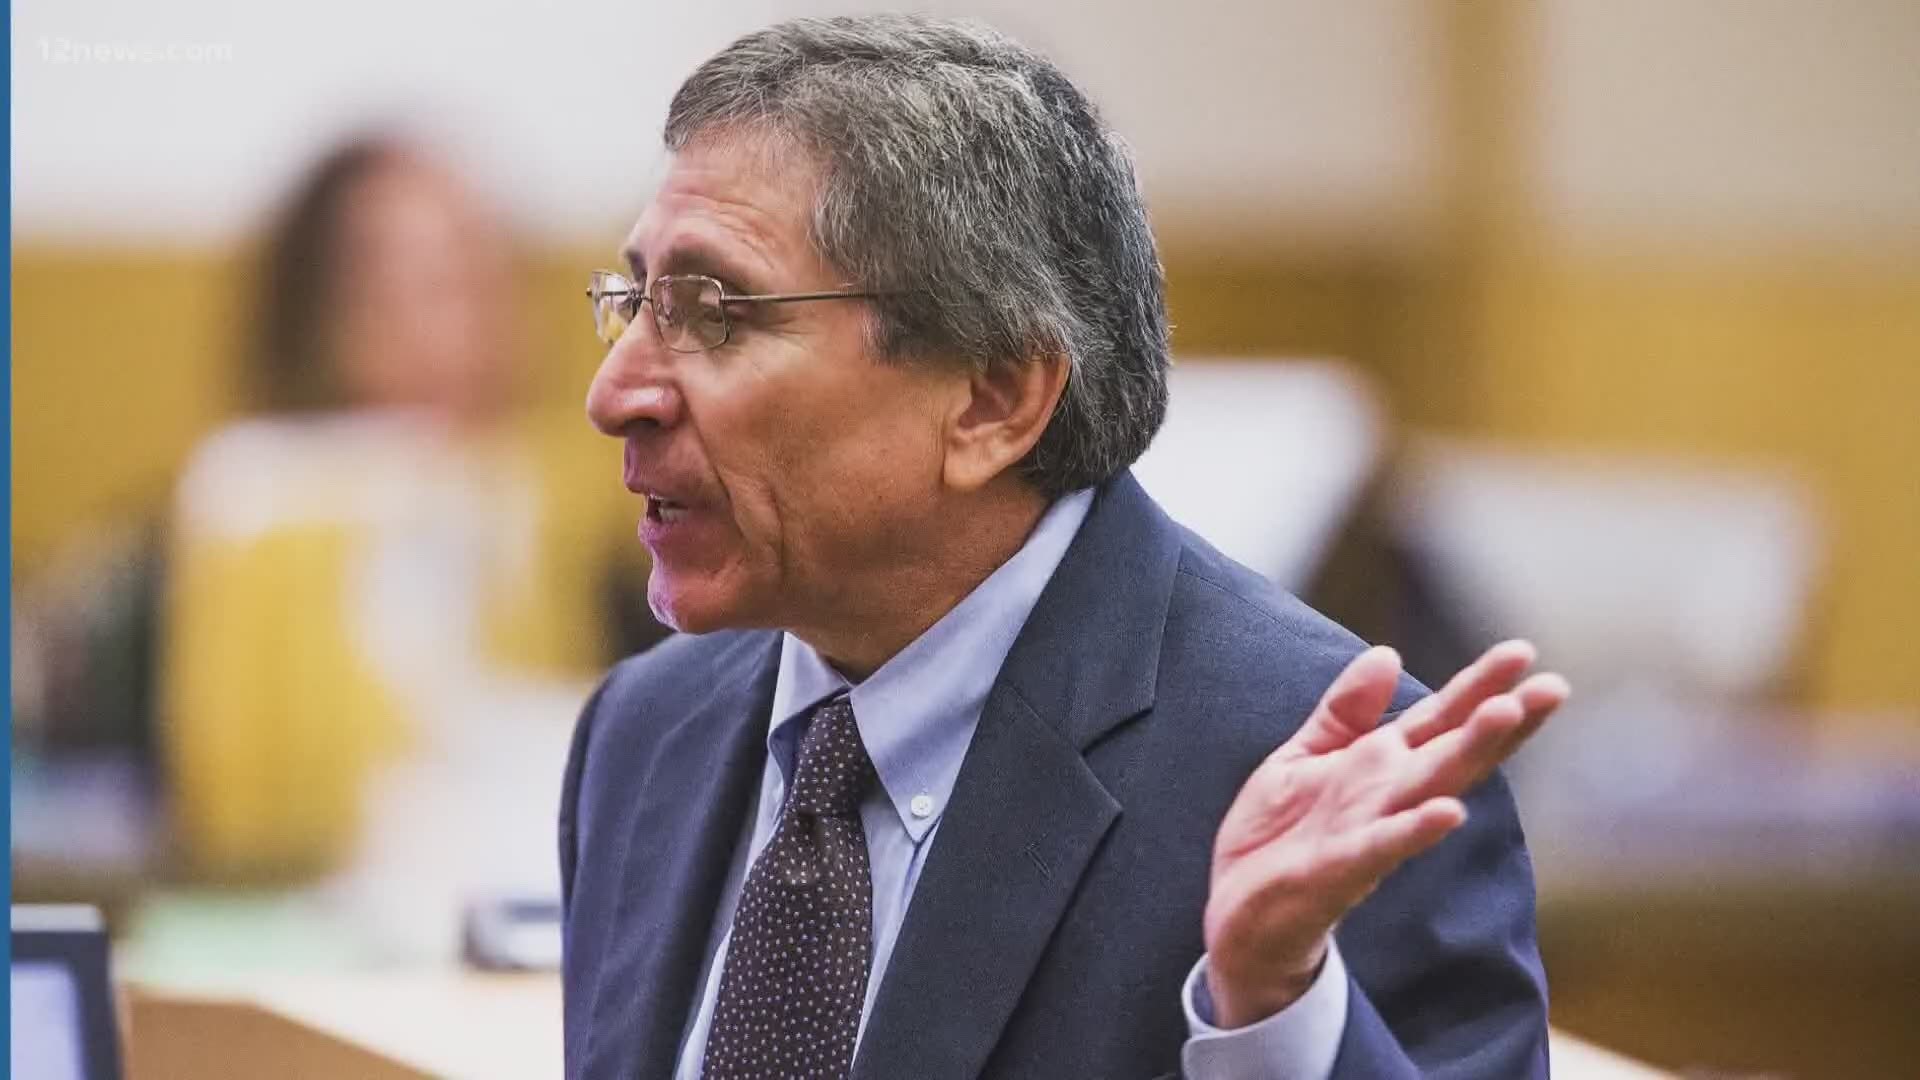 Former Maricopa Co. prosecutor Juan Martinez acted inappropriately during several murder cases, according to the AZ Supreme Court. He will be issued a reprimand.